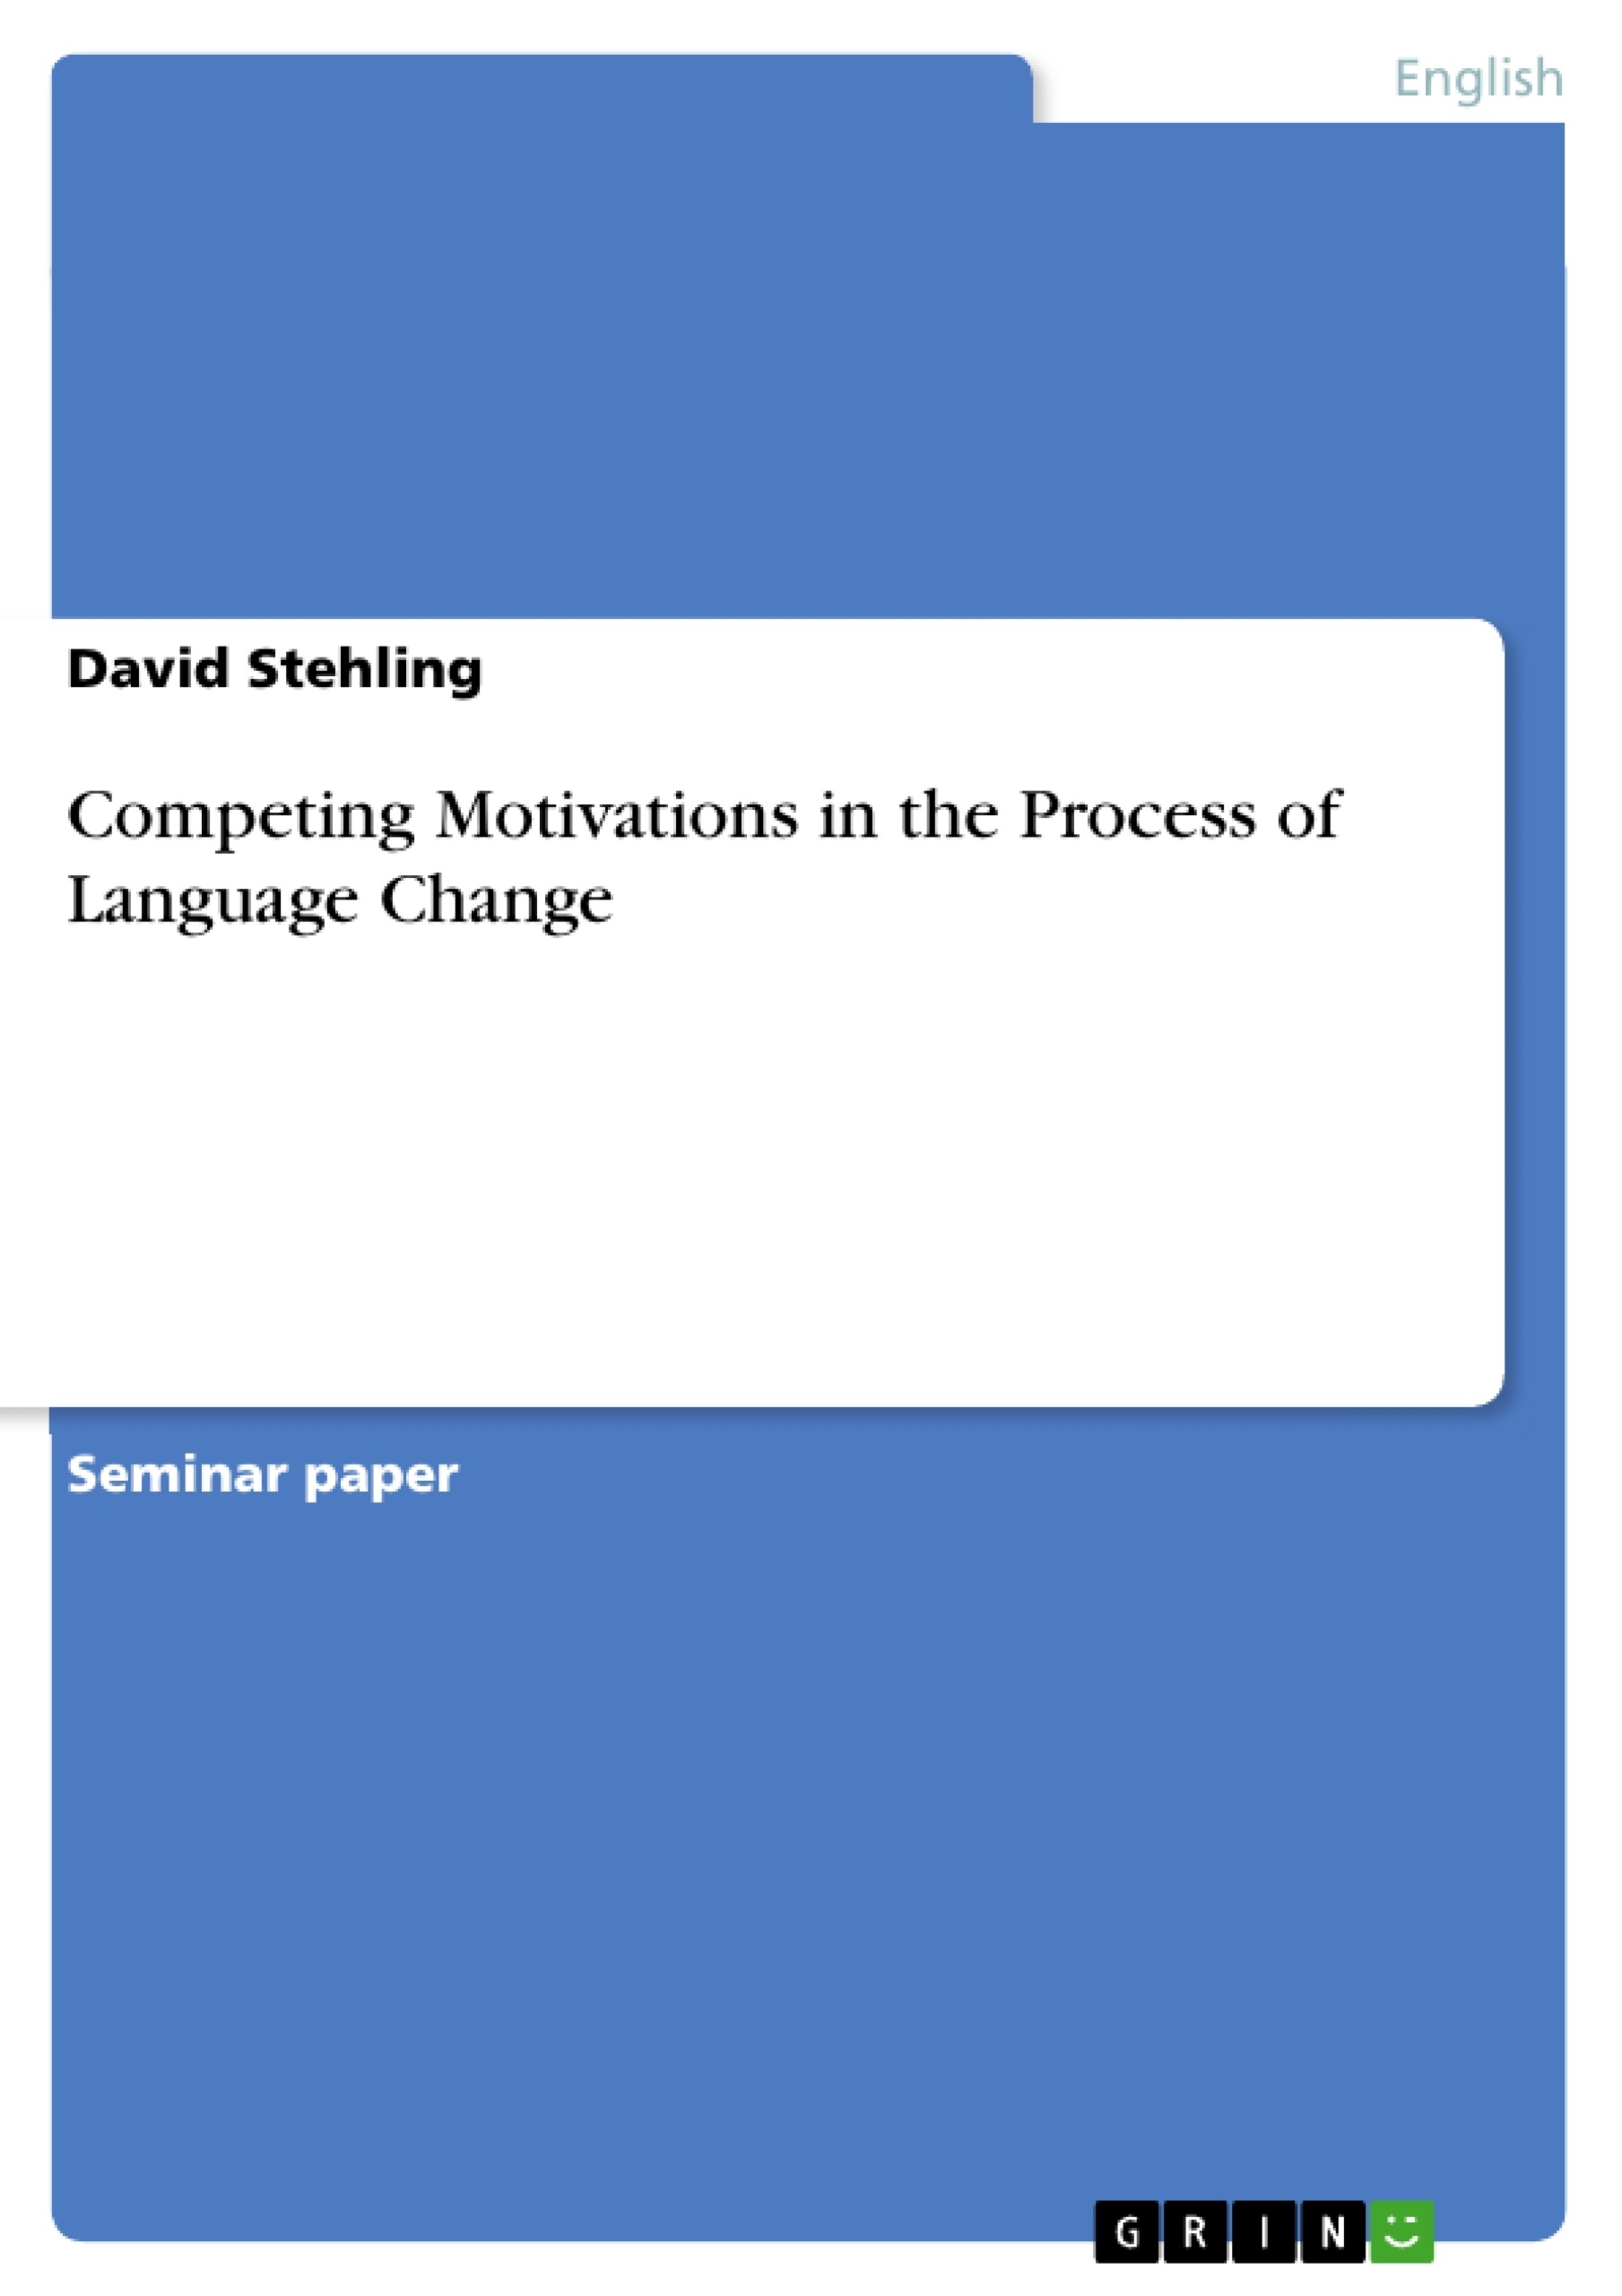 Title: Competing Motivations in the Process of Language Change